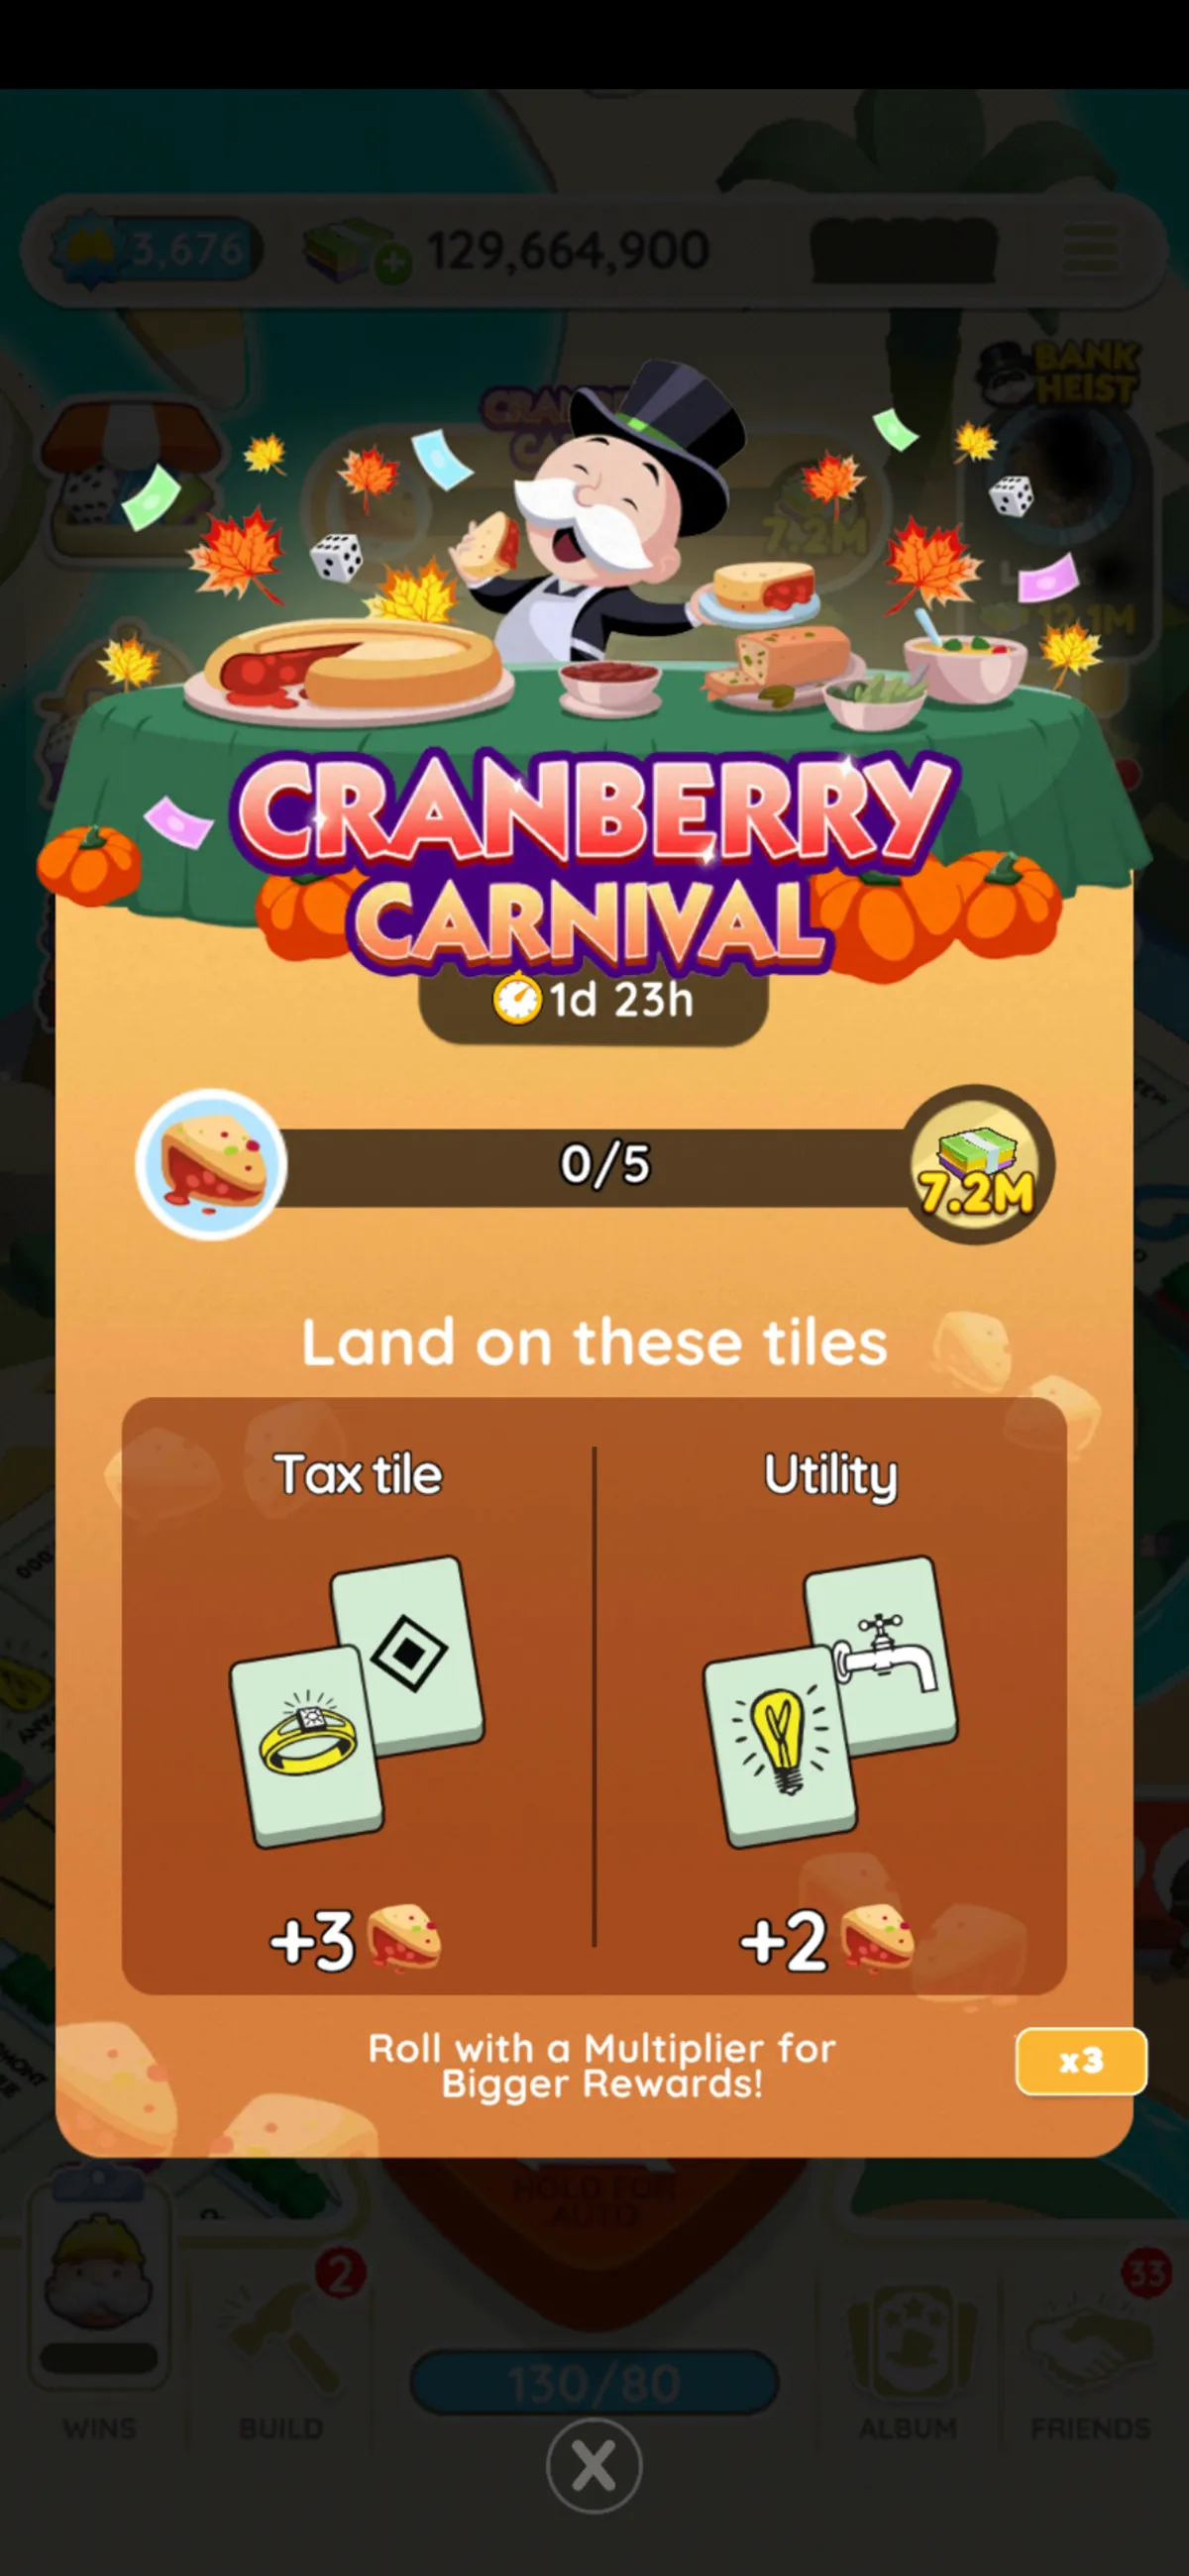 A full-sized image for the "Cranberry Carnival" event in Monopoly GO. The image shows Rich Uncle Pennybags holding a piece of pie while autumnal leaves fall around him. He looks happy.